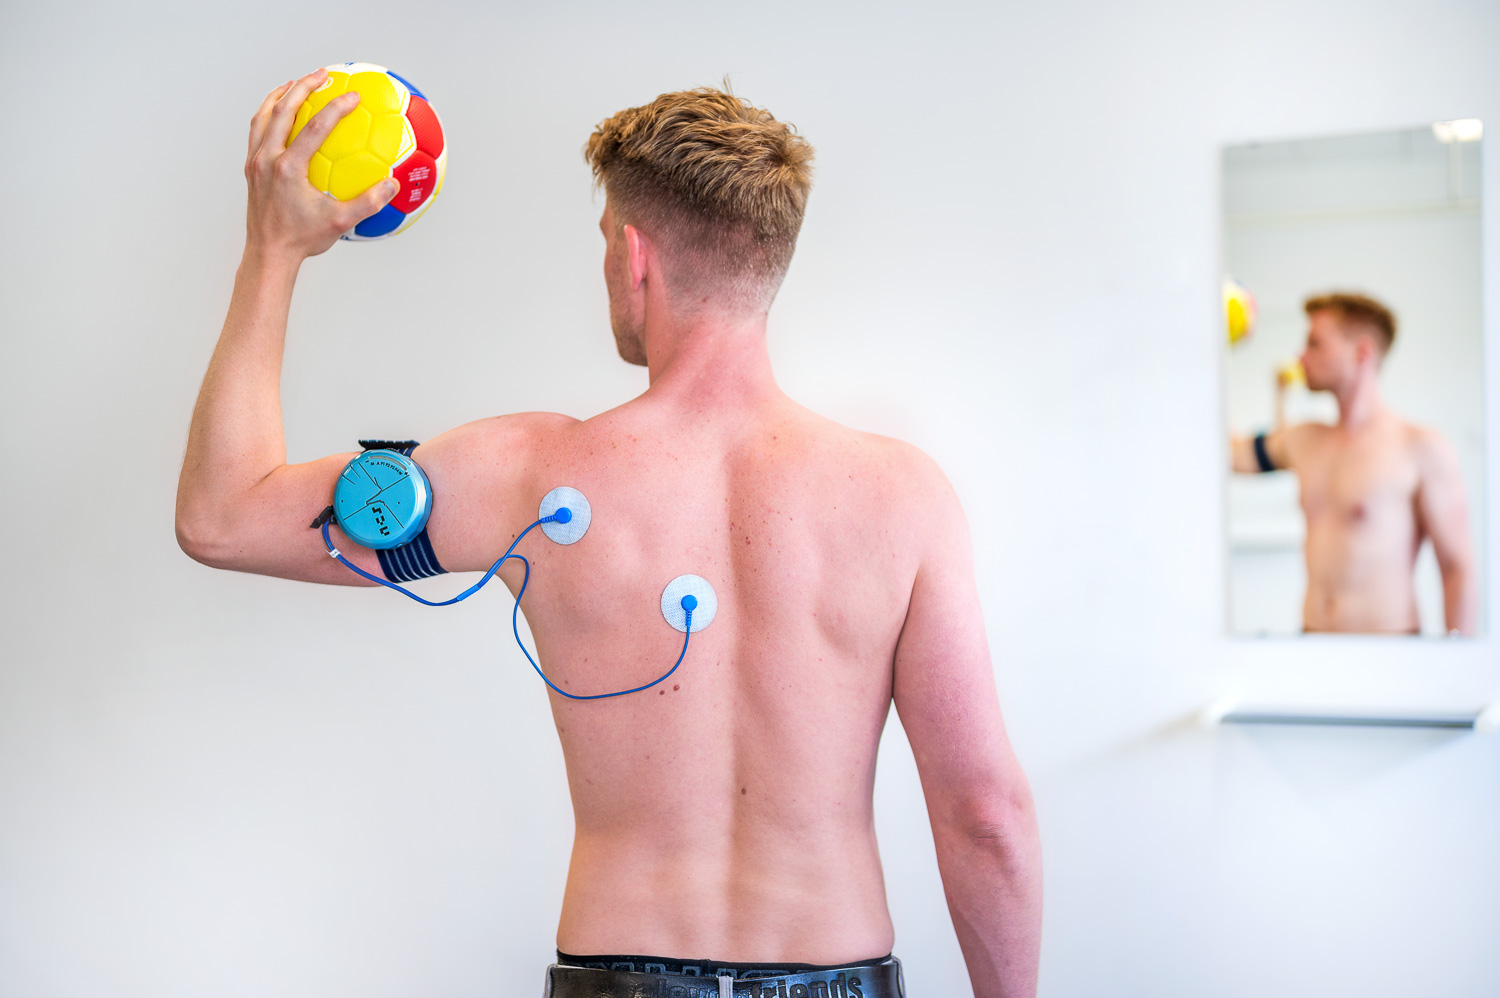 Patient is seen from behind with the Shoulder Pacemaker on his left shoulder, holding a handball.